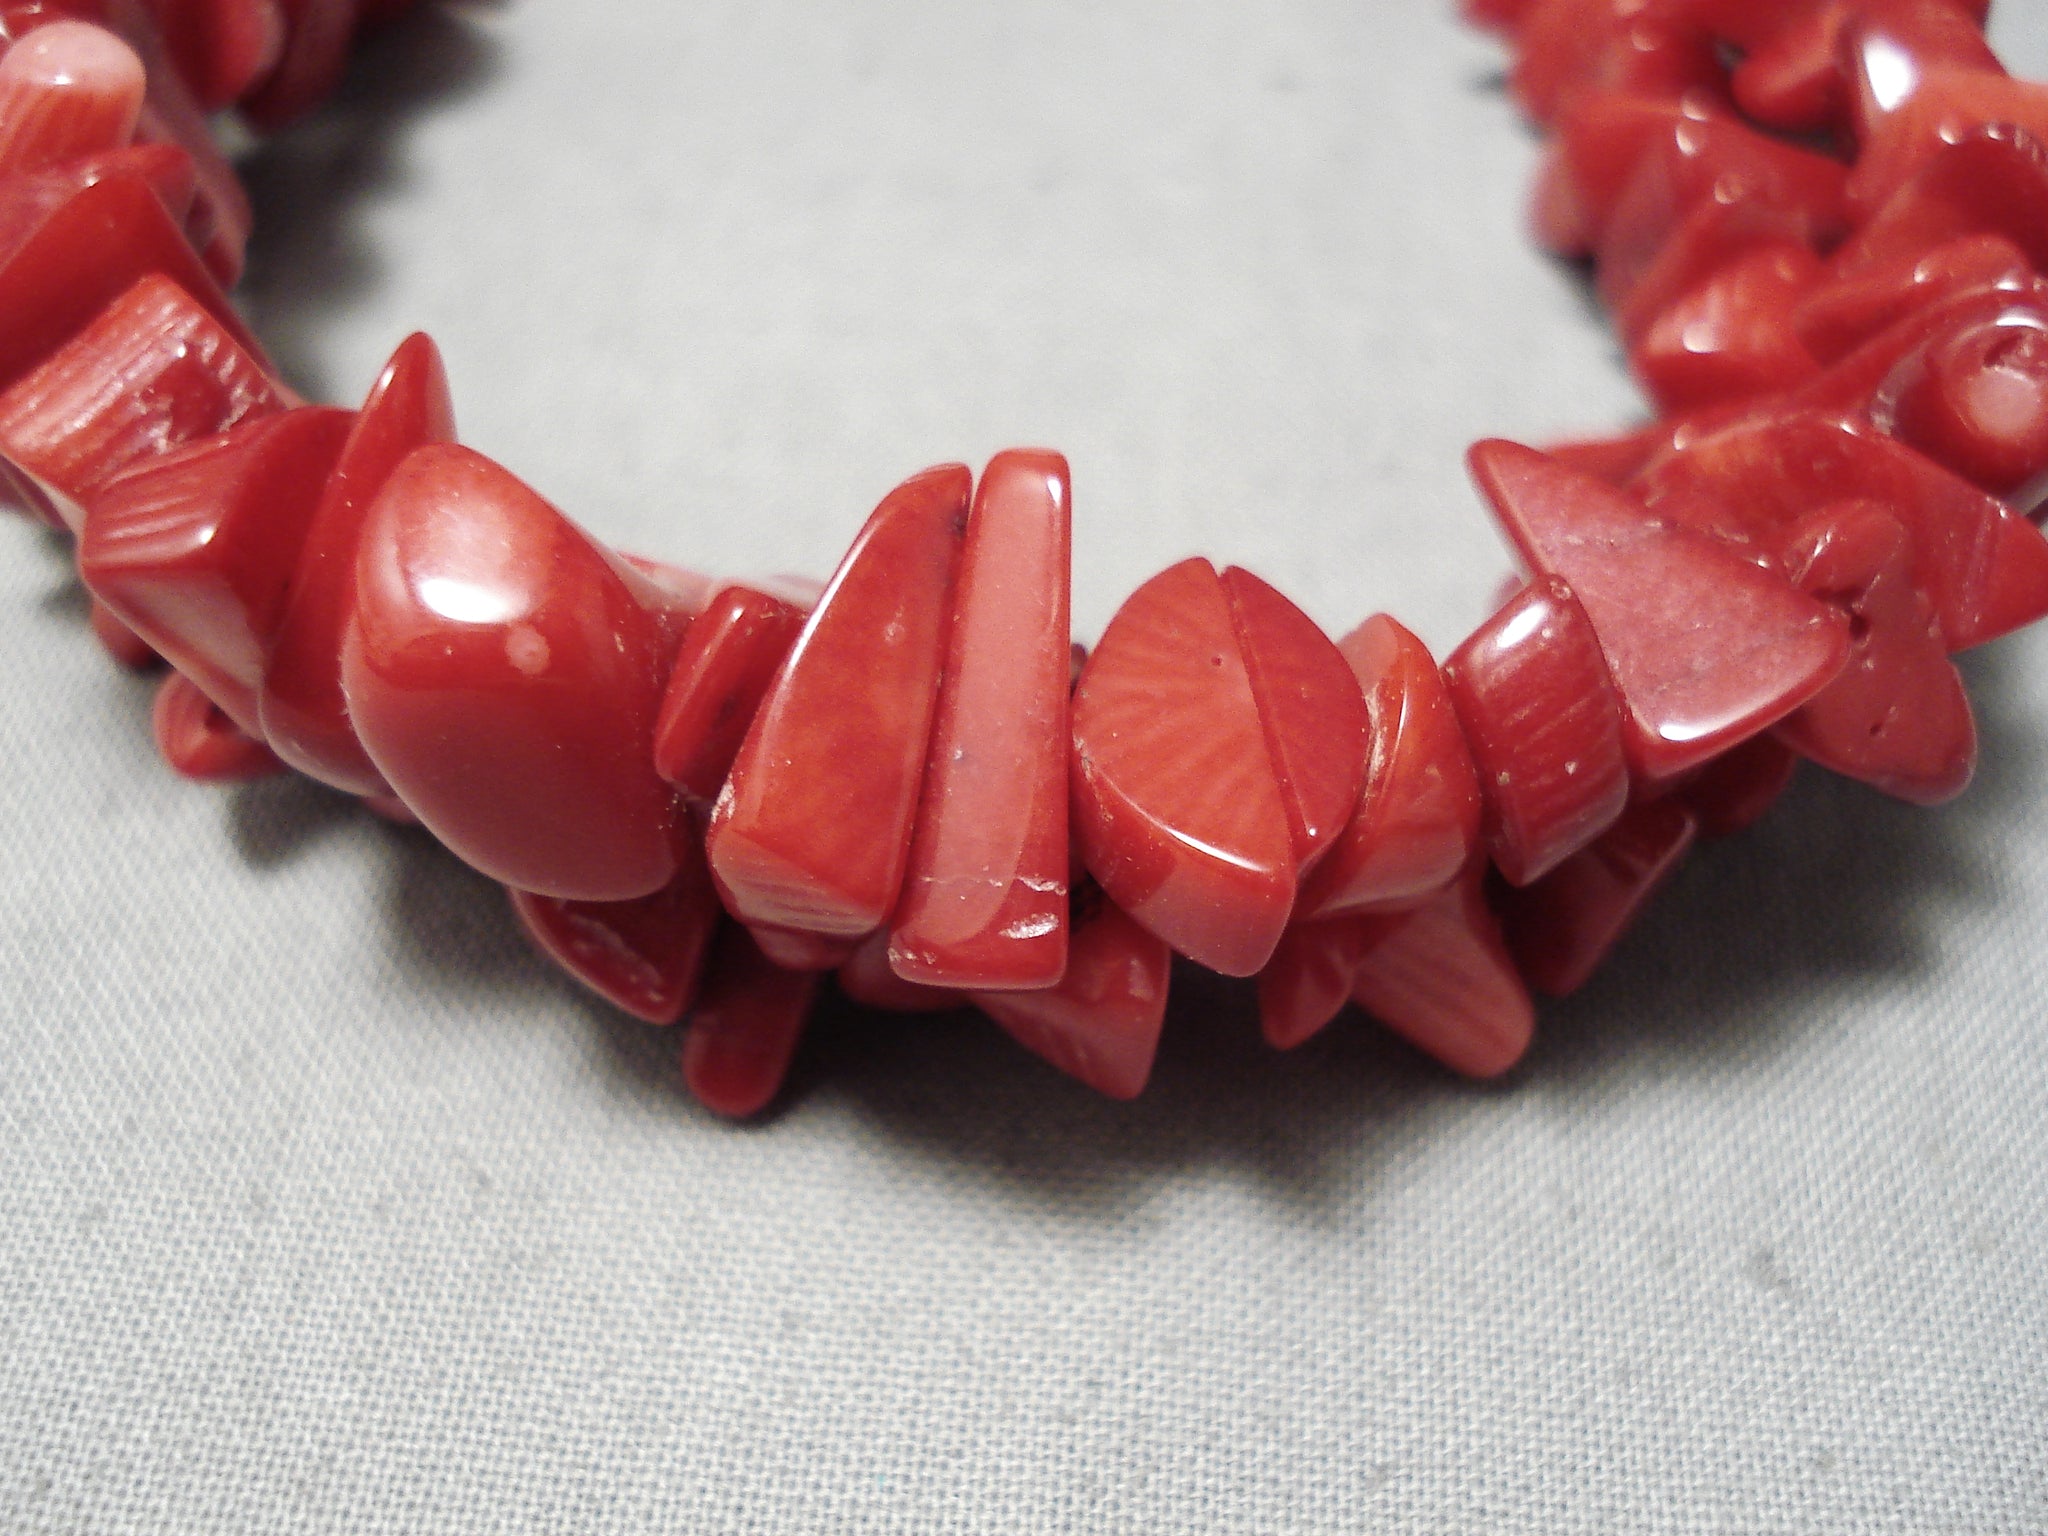 Vintage Chunky Red Coral Necklace, Vintage Coral Jewelry, Red